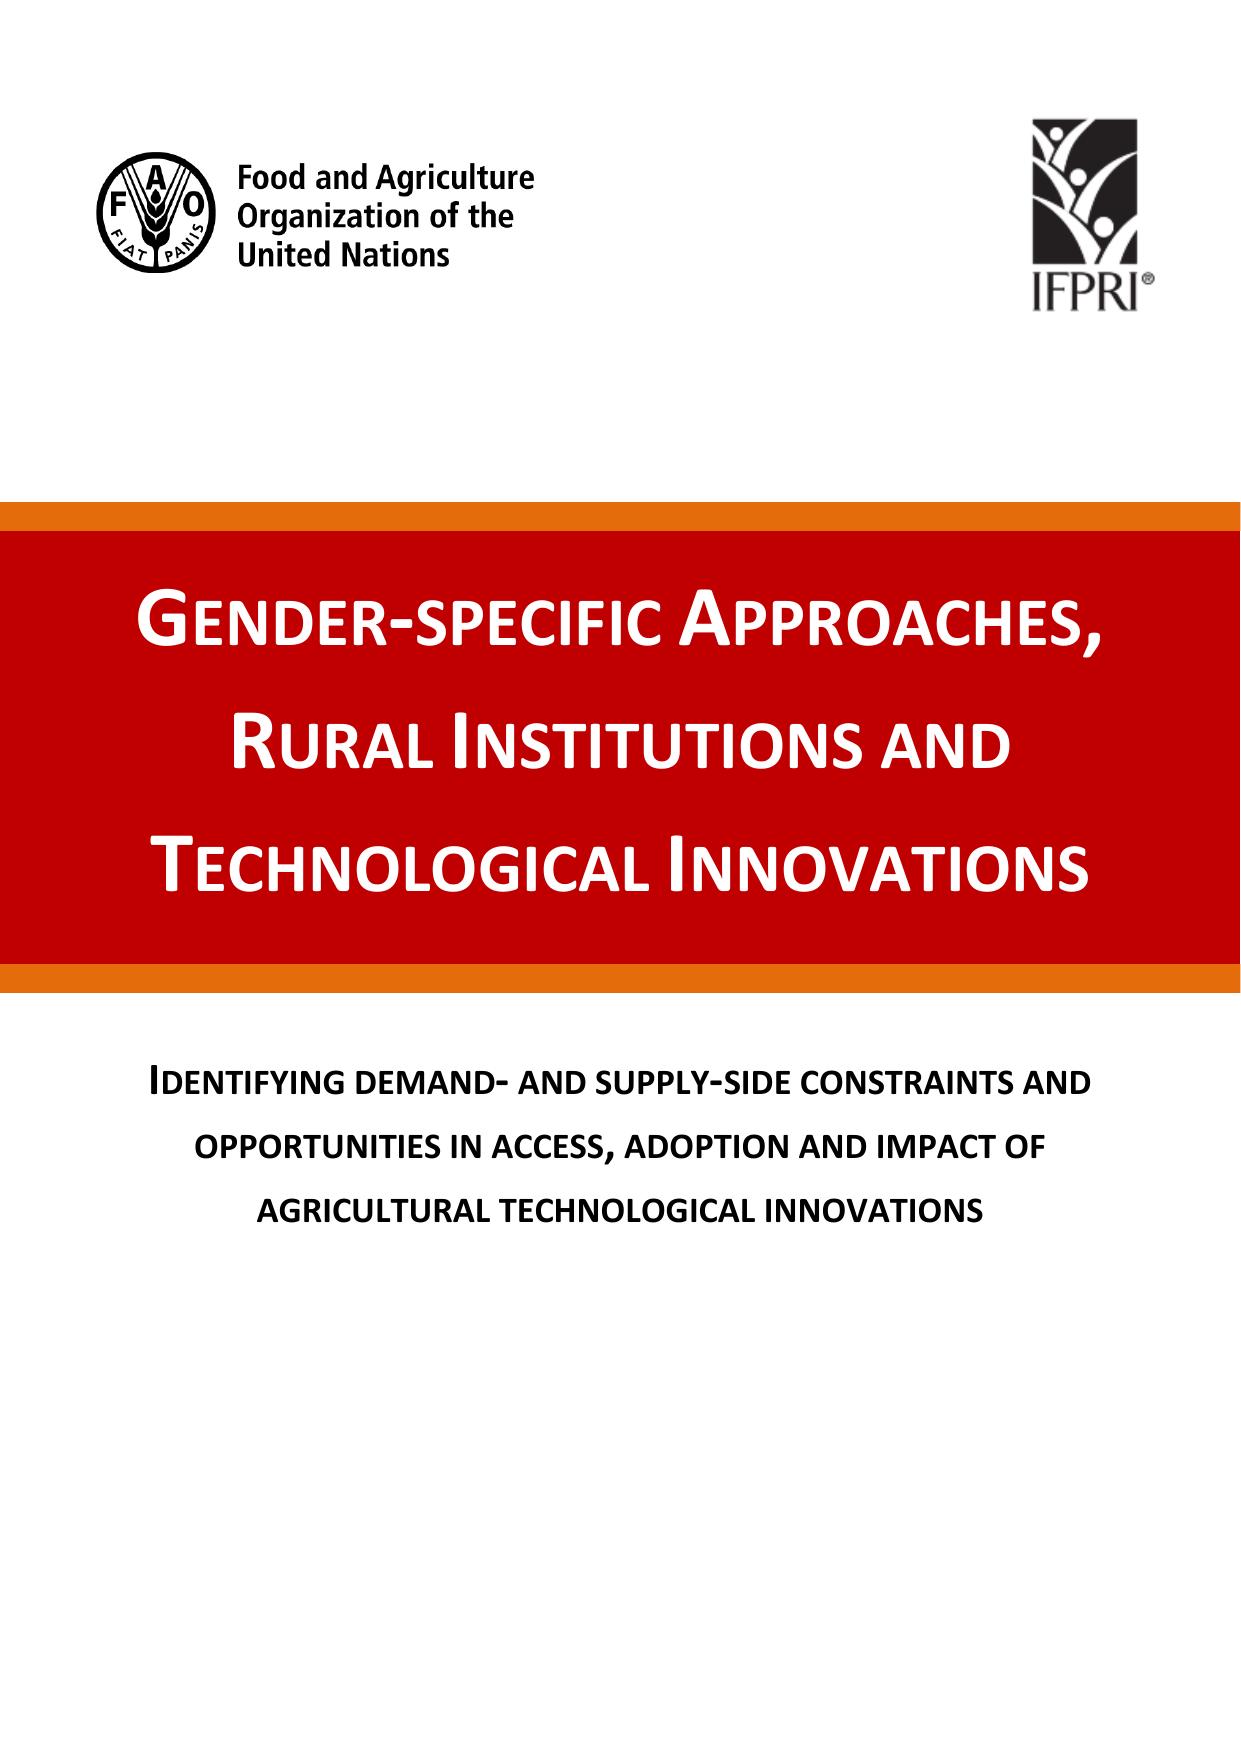 Gender-specific approaches, rural institutions and technological innovations